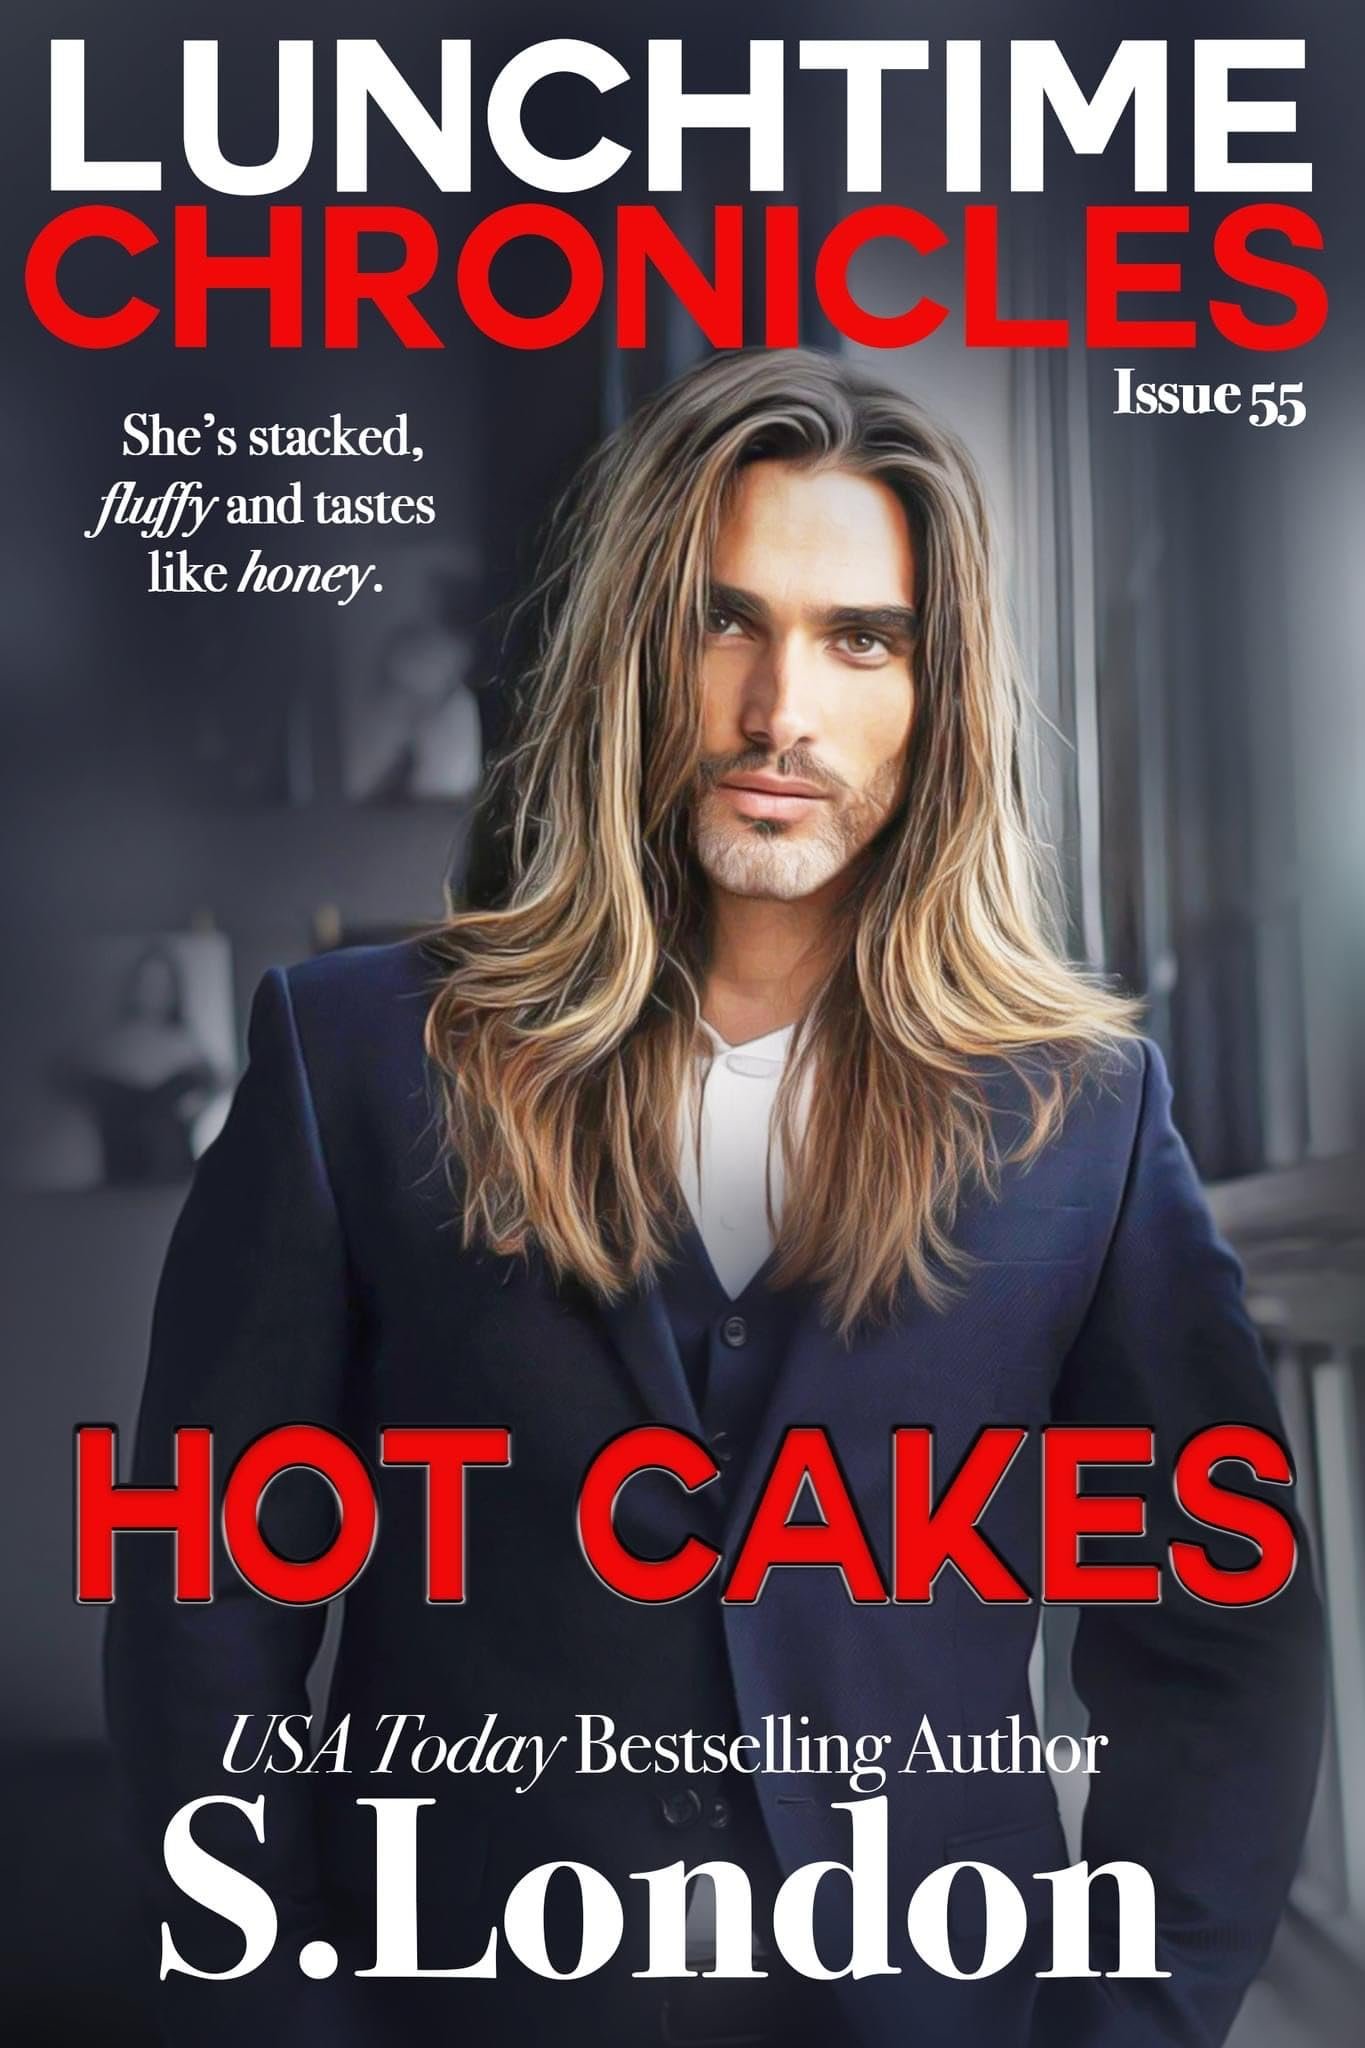 Lunchtime Chronicles: Hot Cakes: Lunchtime Chronicles Season 6 -Steamy Instalove BWWM Romance Cover